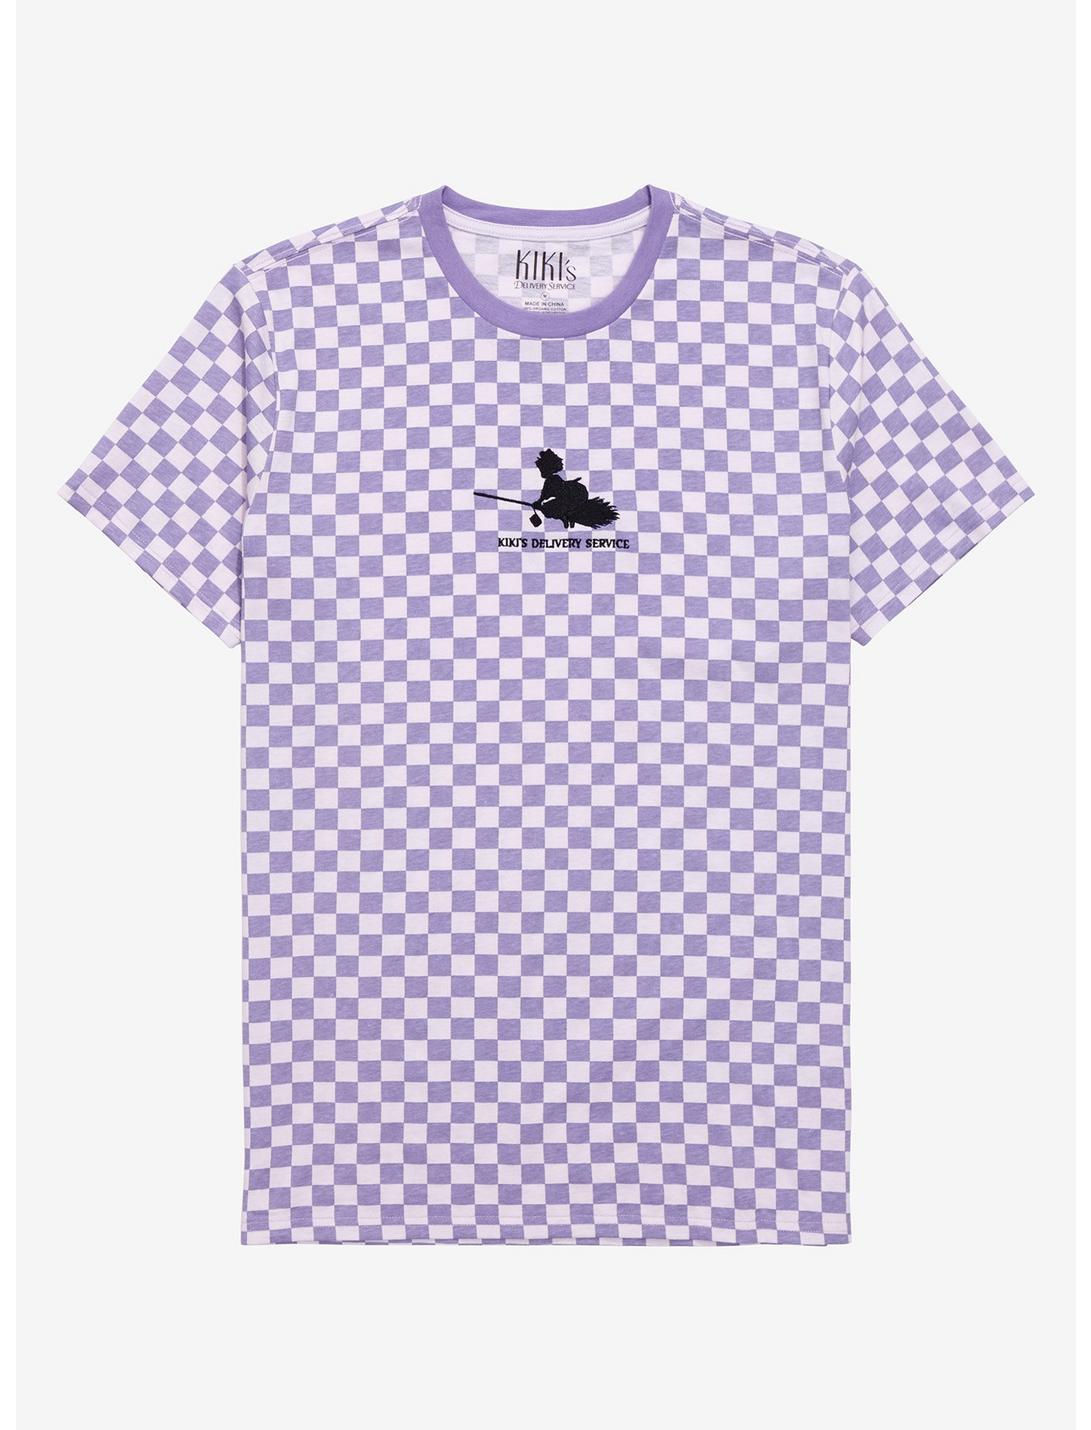 Studio Ghibli Kiki's Delivery Service Silhouette Checkered T-Shirt - BoxLunch Exclusive, LILAC, hi-res